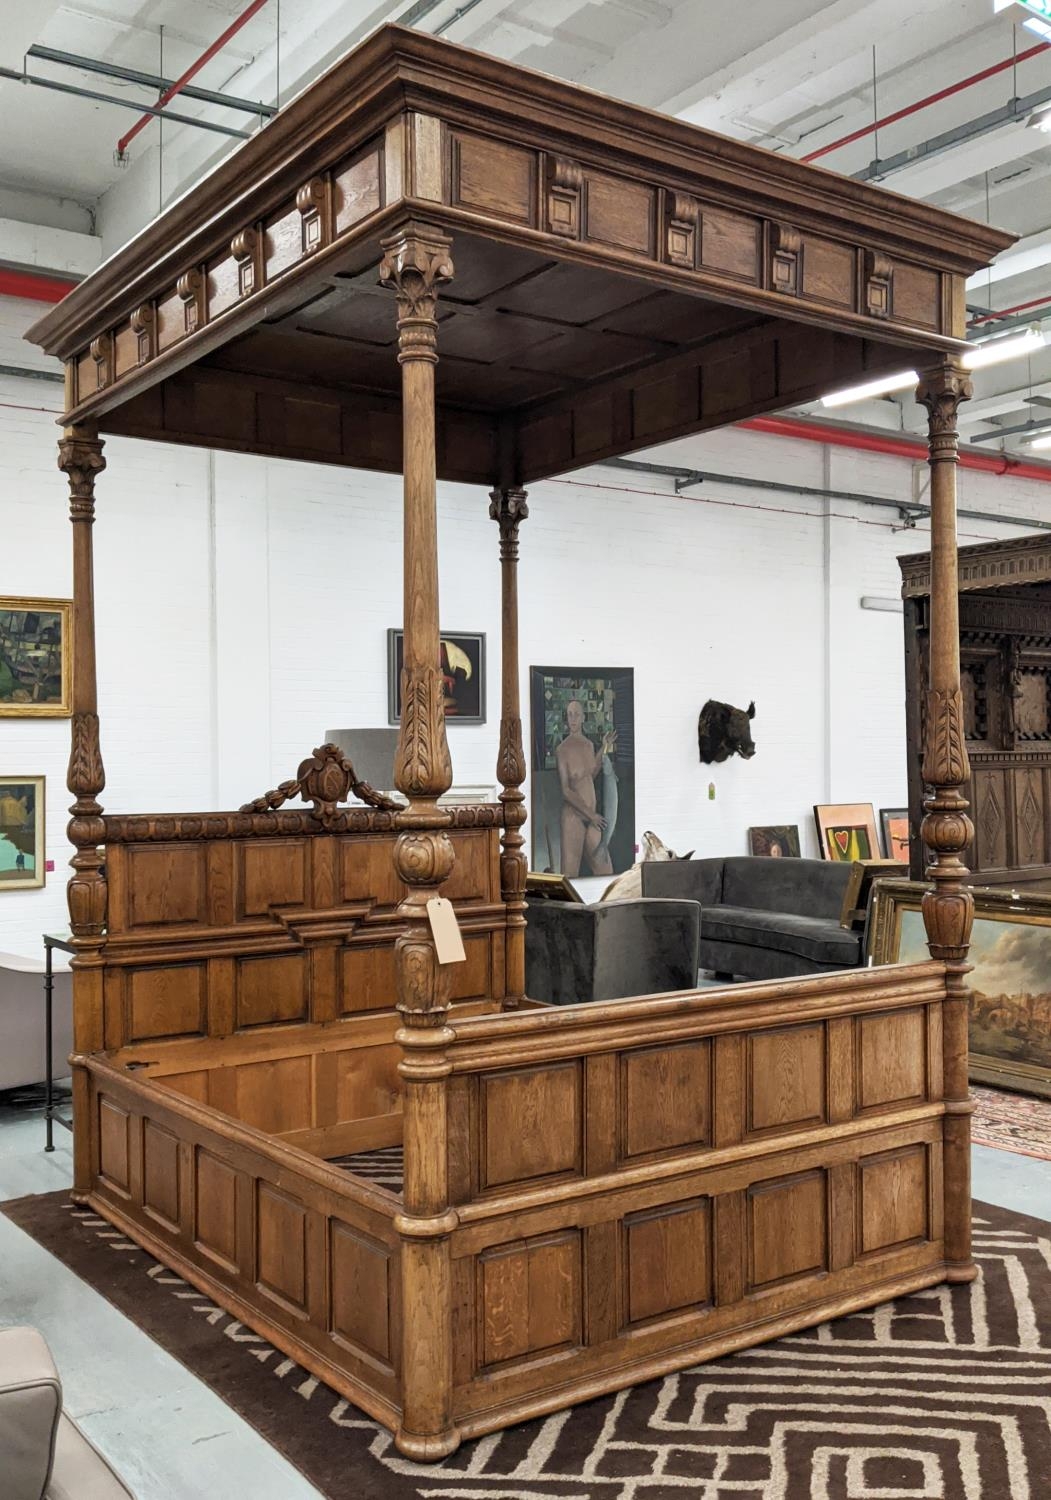 FOUR POSTER BED, late 19th/early 20th century Continental oak, rectangular canopy above four